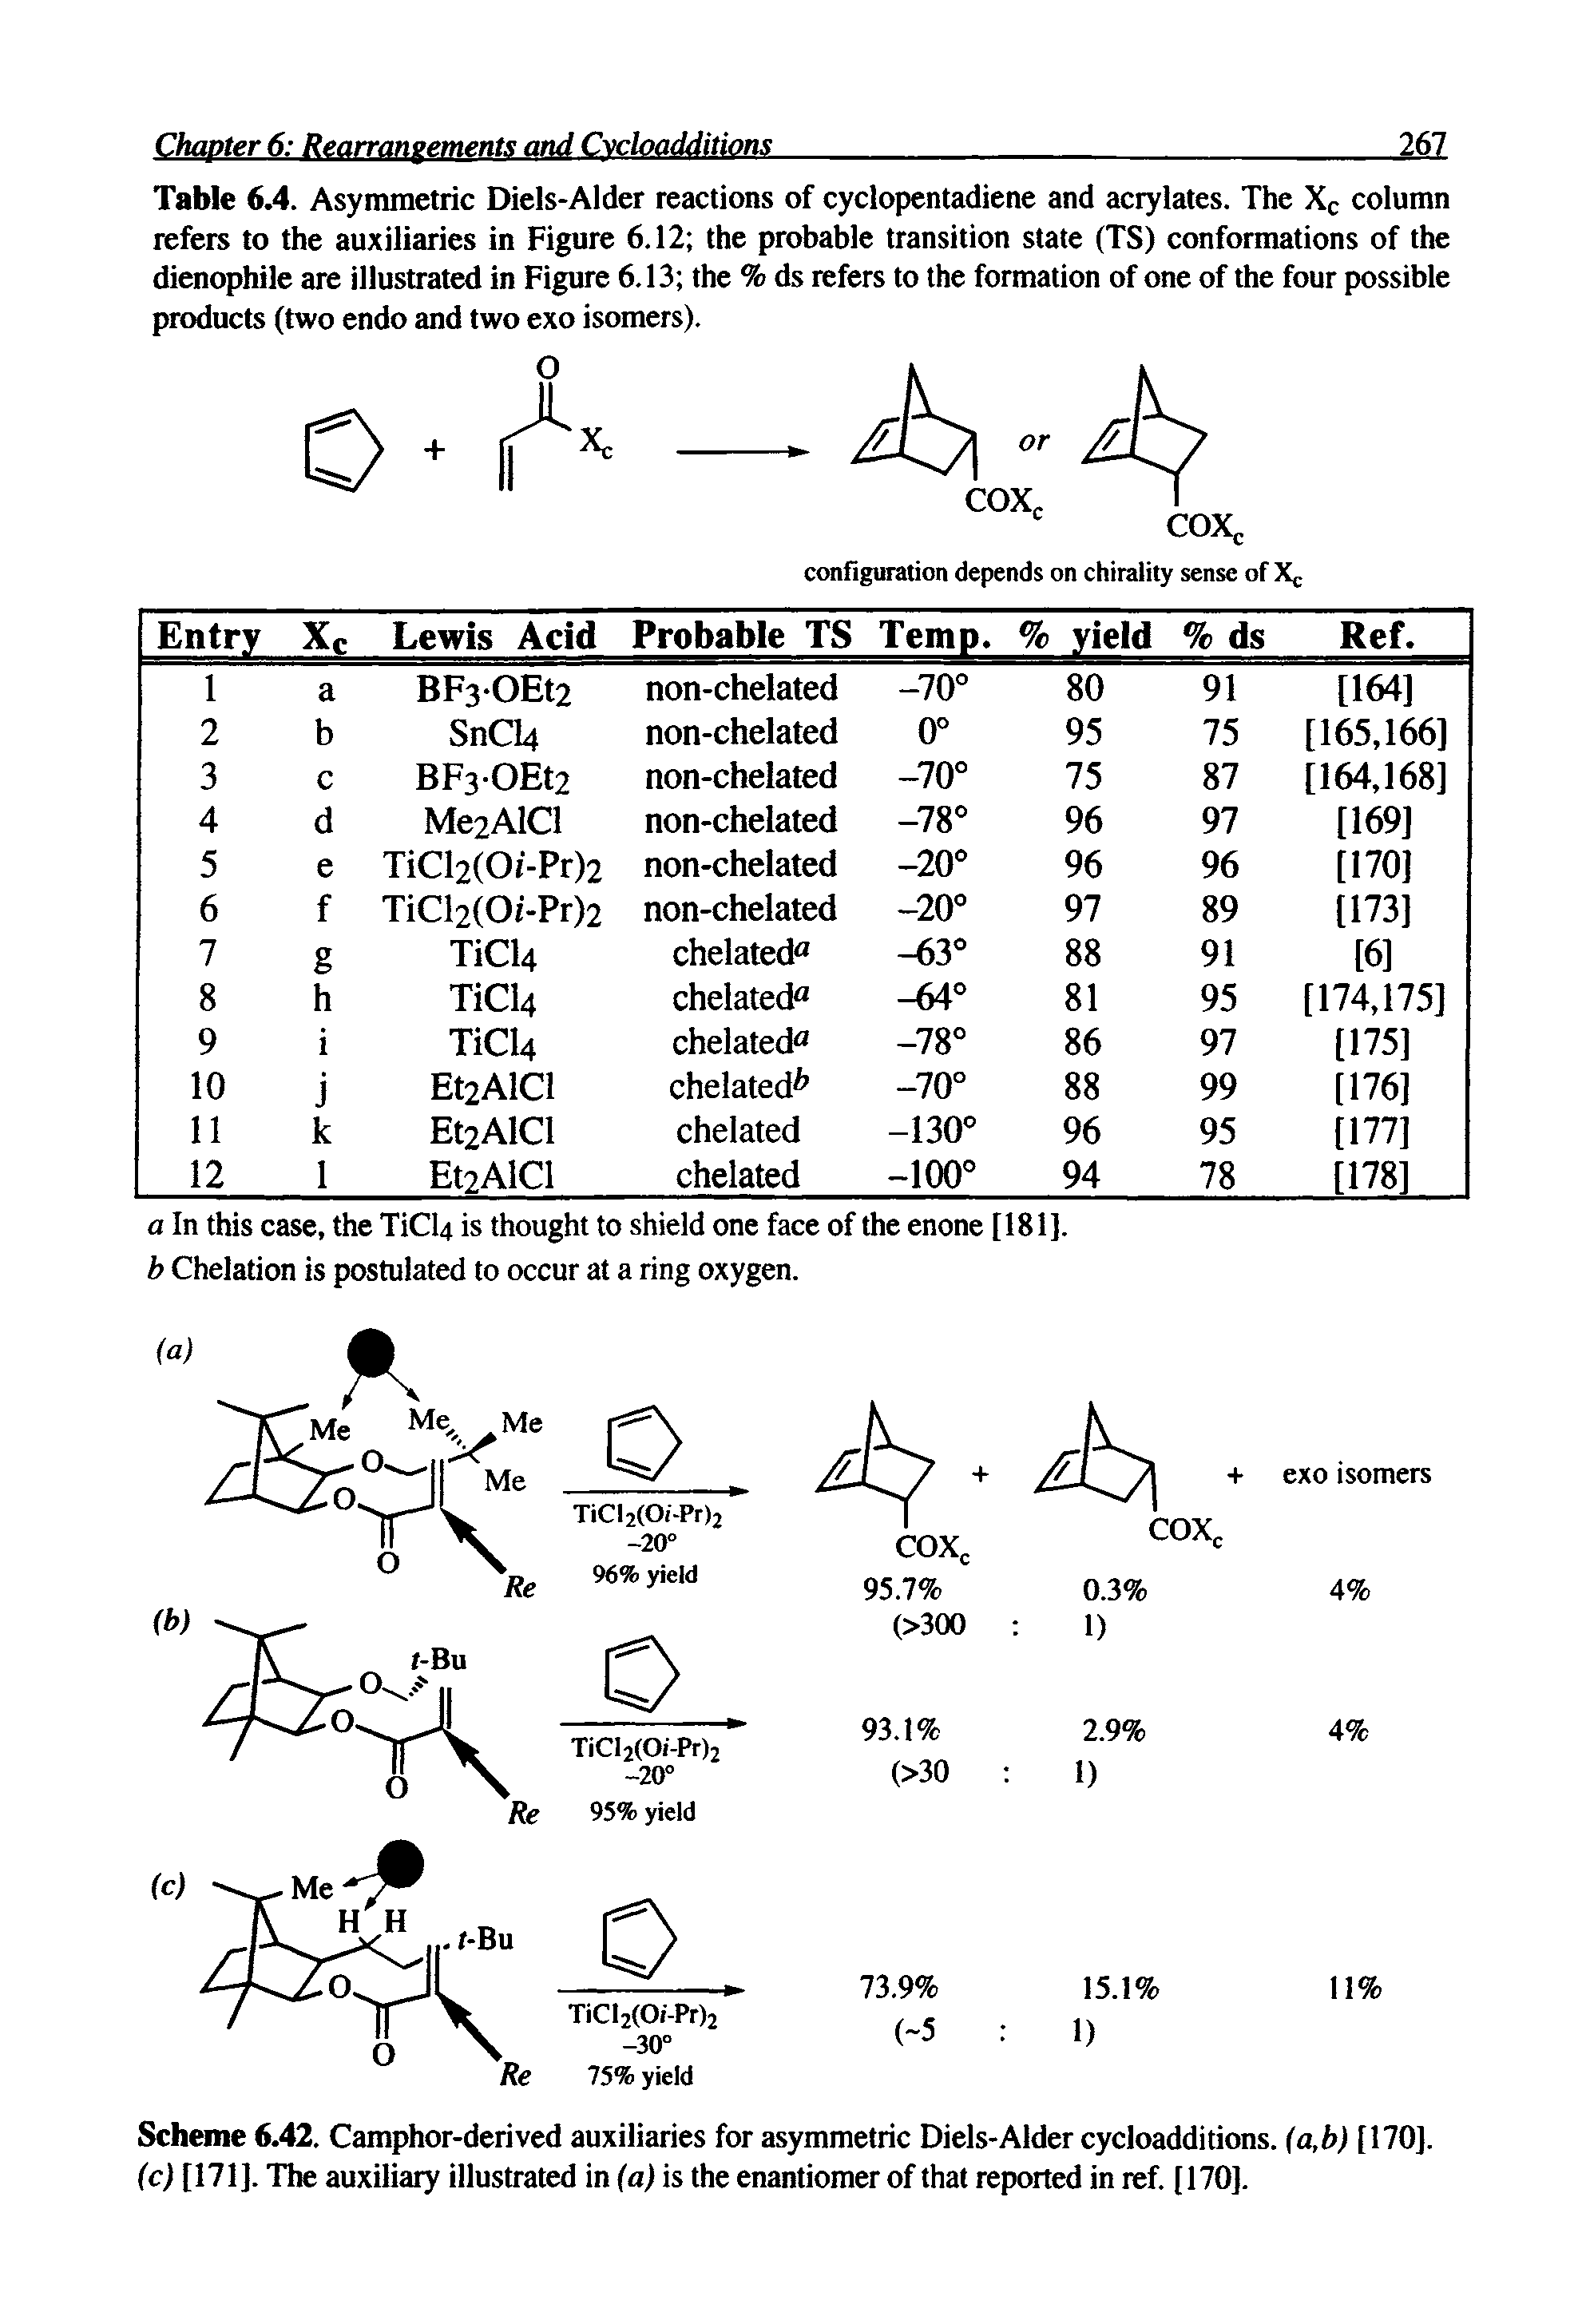 Scheme 6.42. Camphor-derived auxiliaries for asymmetric Diels-Alder cycloadditions. (a,b) [170]. (cj [171]. The auxiliary illustrated in (a) is the enantiomer of that reported in ref. [170].